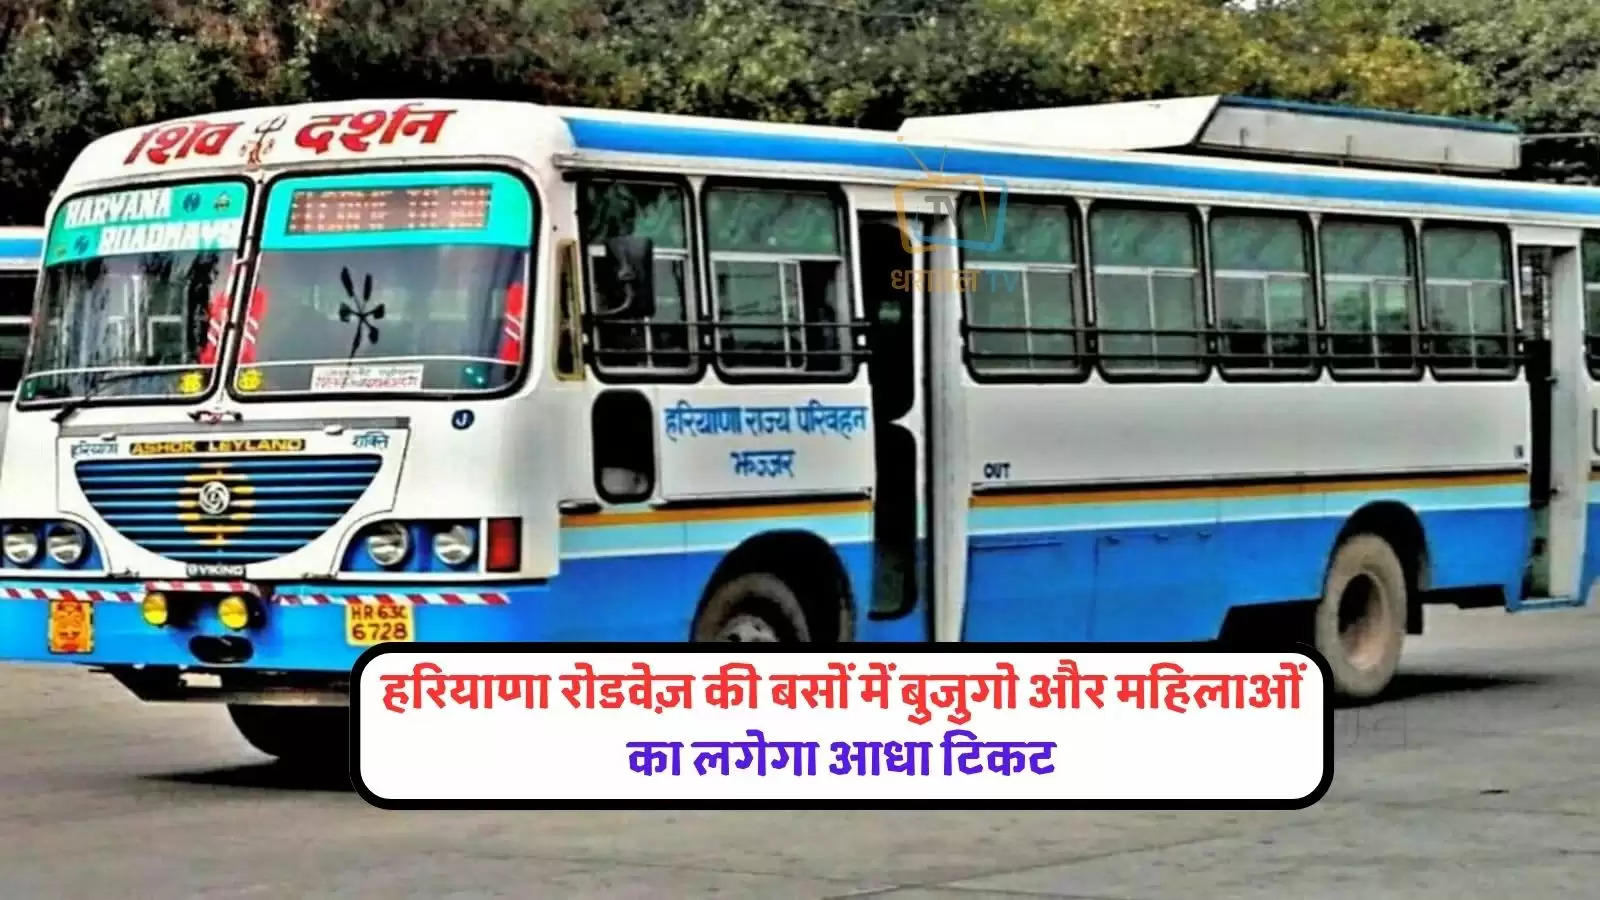 haryana-women-and-elderly-person-will-get-discount-on-fare-in-roadways-buses-know-ful